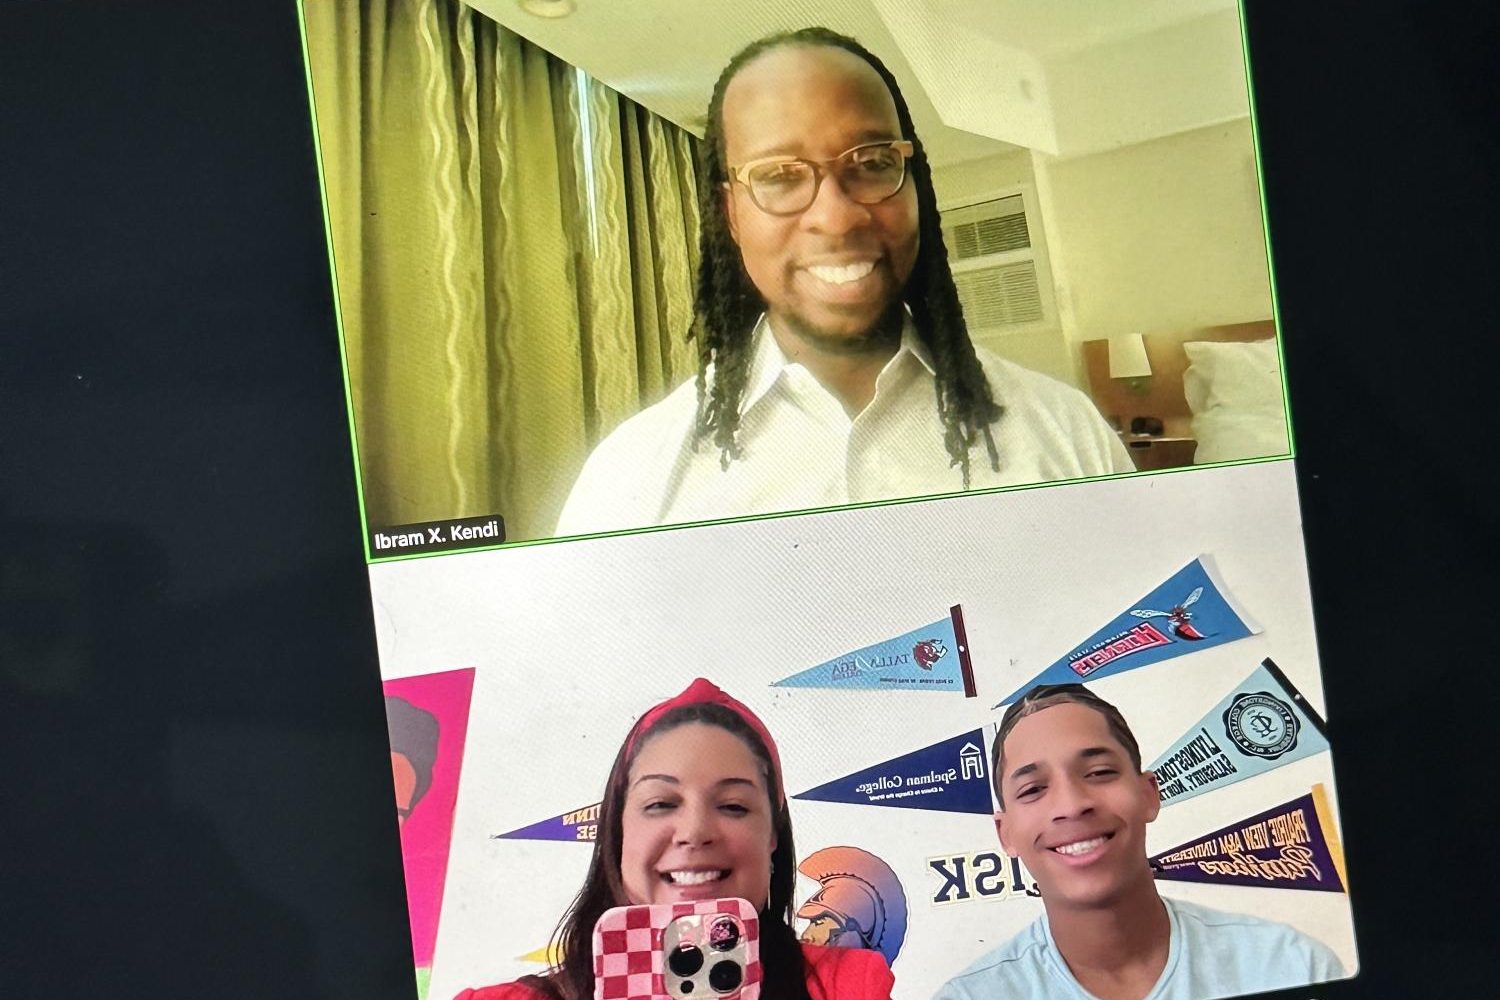 Ibram X. Kendi (above) participated in a BSU-led webinar on the topic of racism with BSU Co-president Auvin Cole (lower right) and Assistant Superintendent Kelly Lara (lower left).